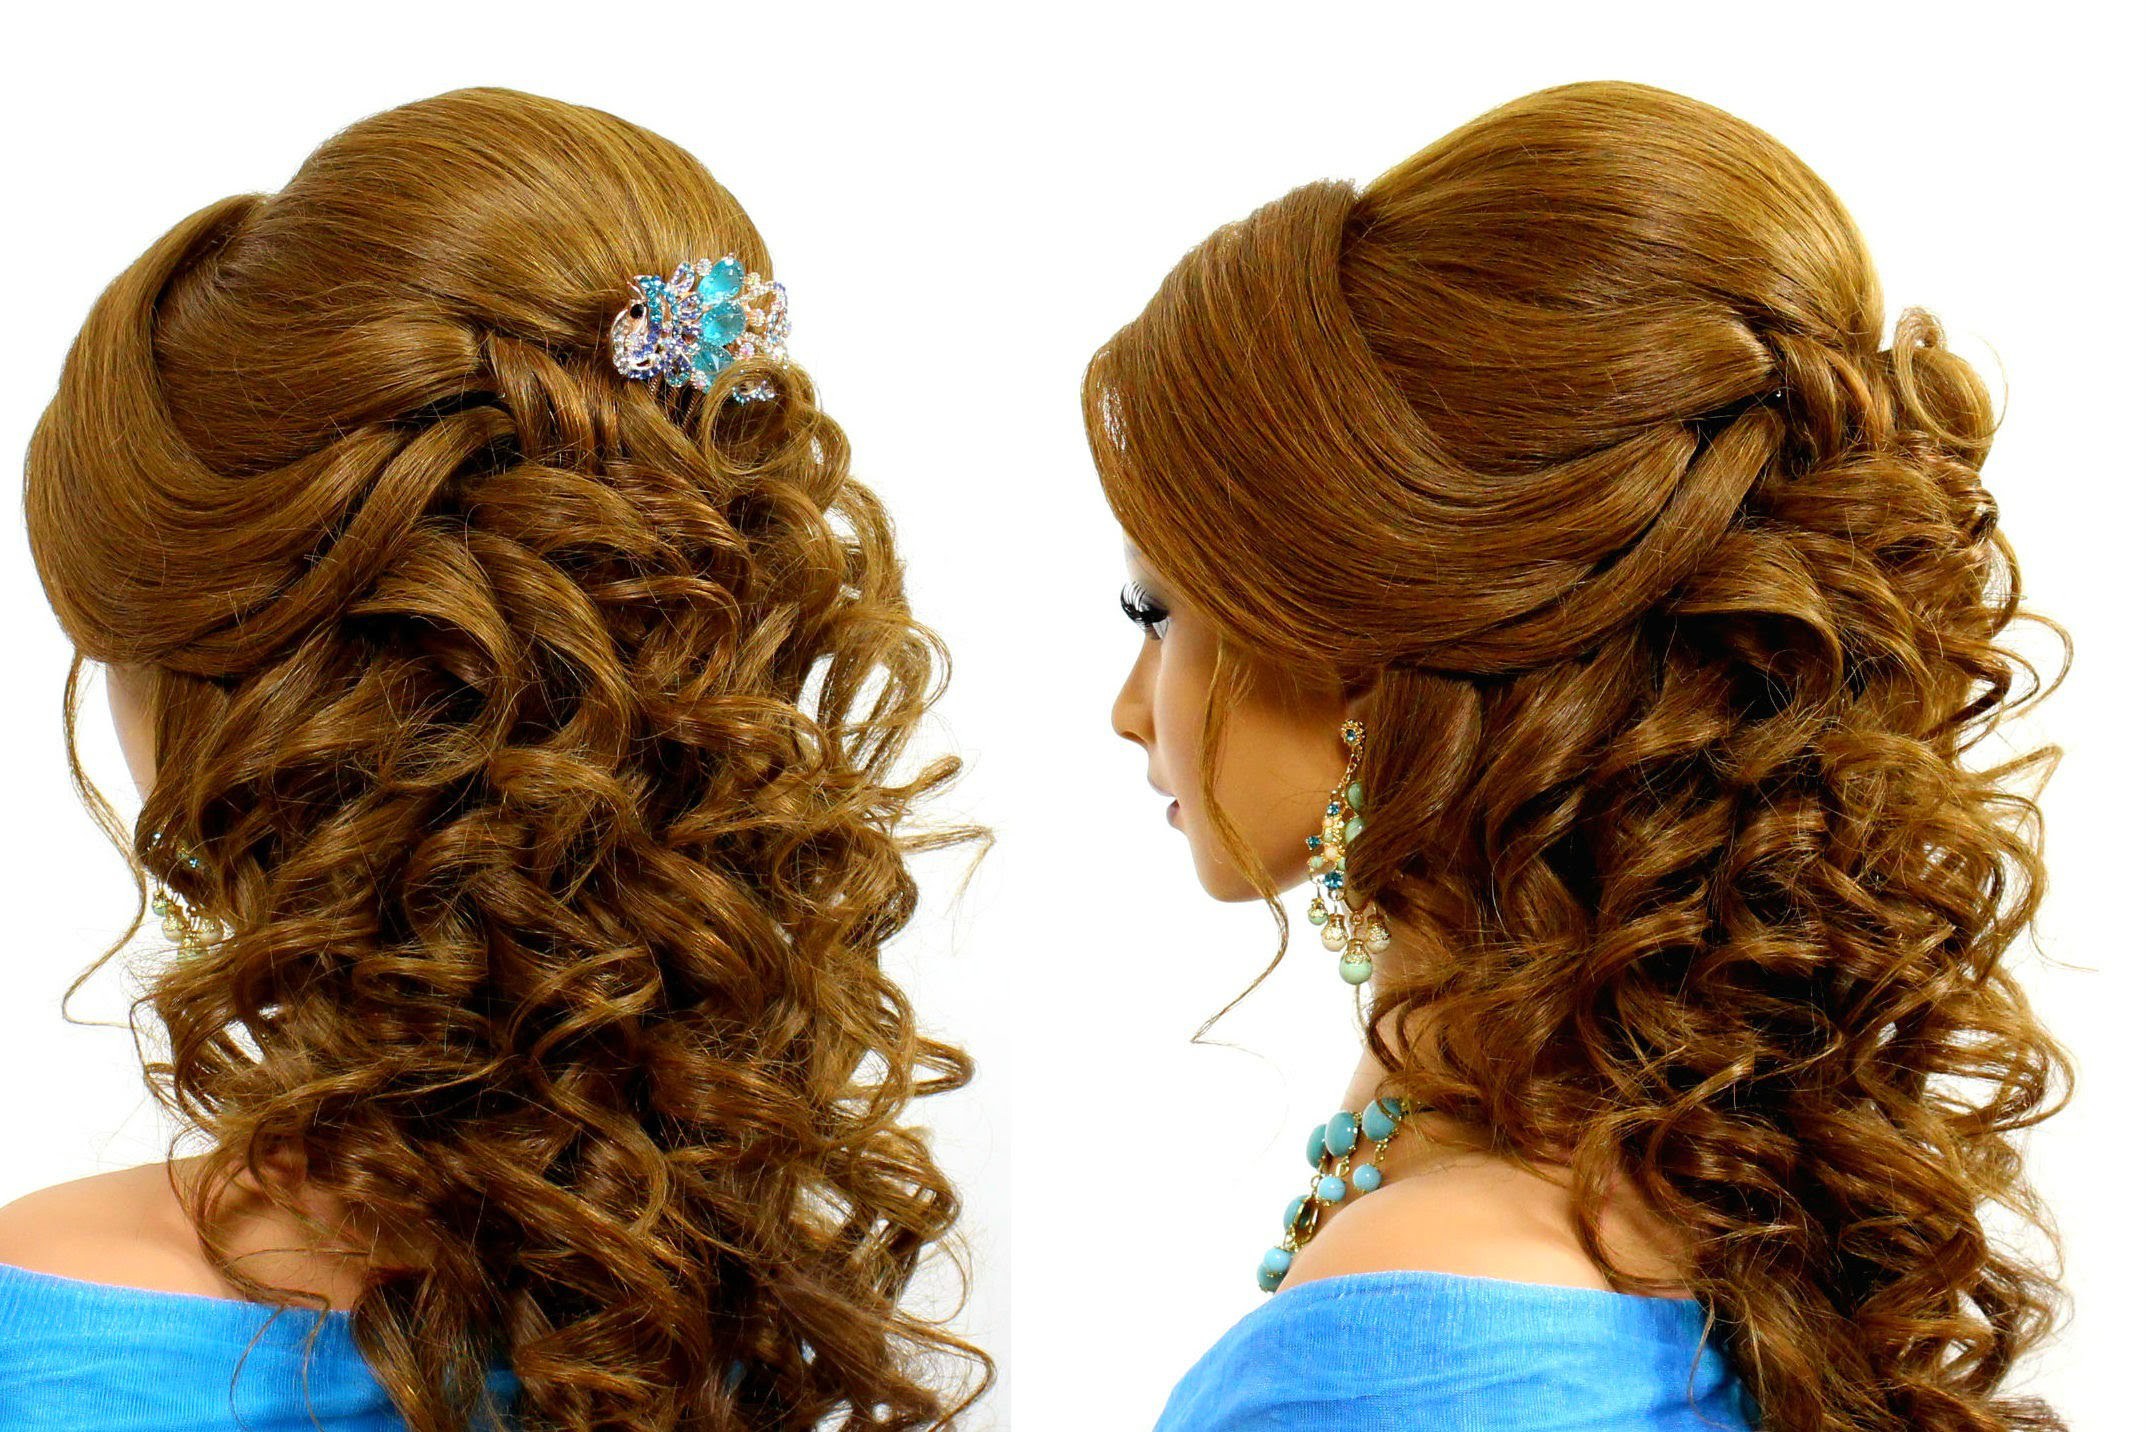 6 Romantic Hairstyles that will Drive Him CRAZY: Just in Time for  Valentine's Day! - YouTube